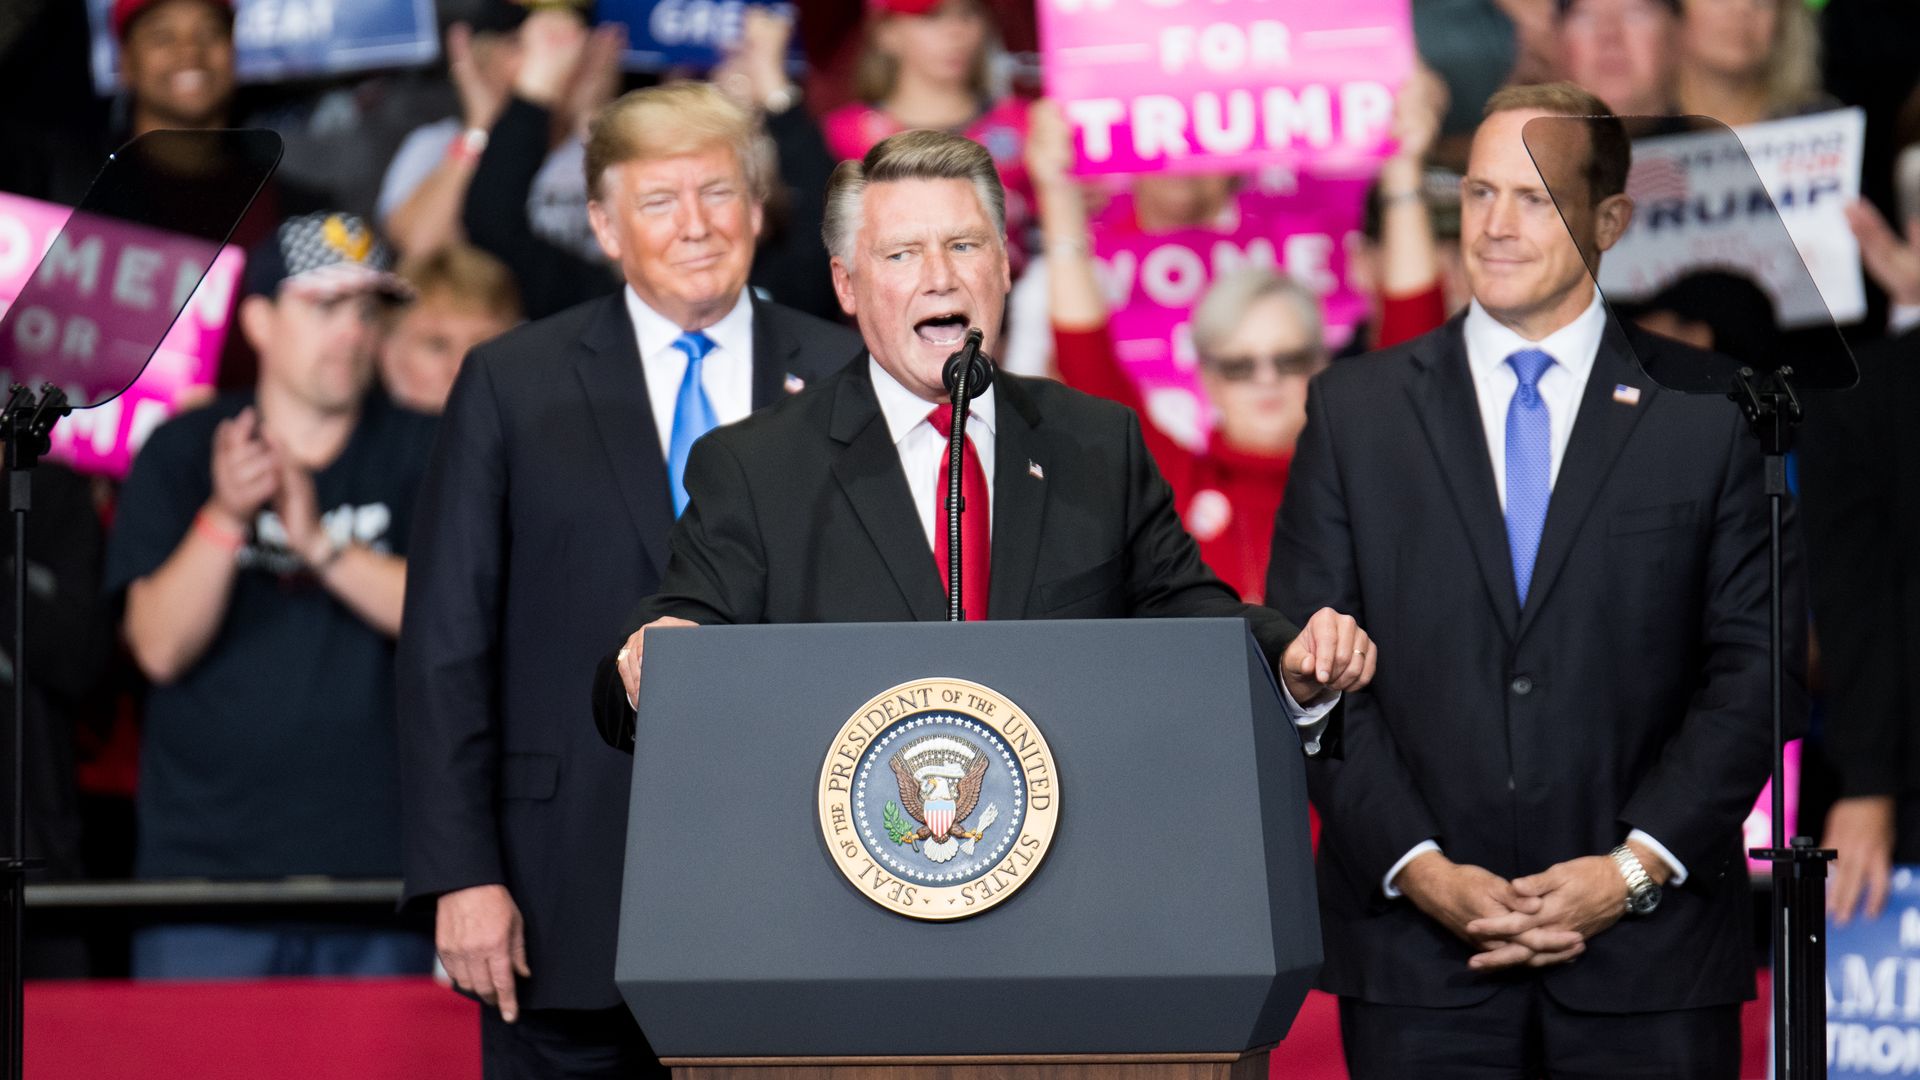 Mark Harris, North Carolina’s 9th district Republican candidate at a campaign rally last year.